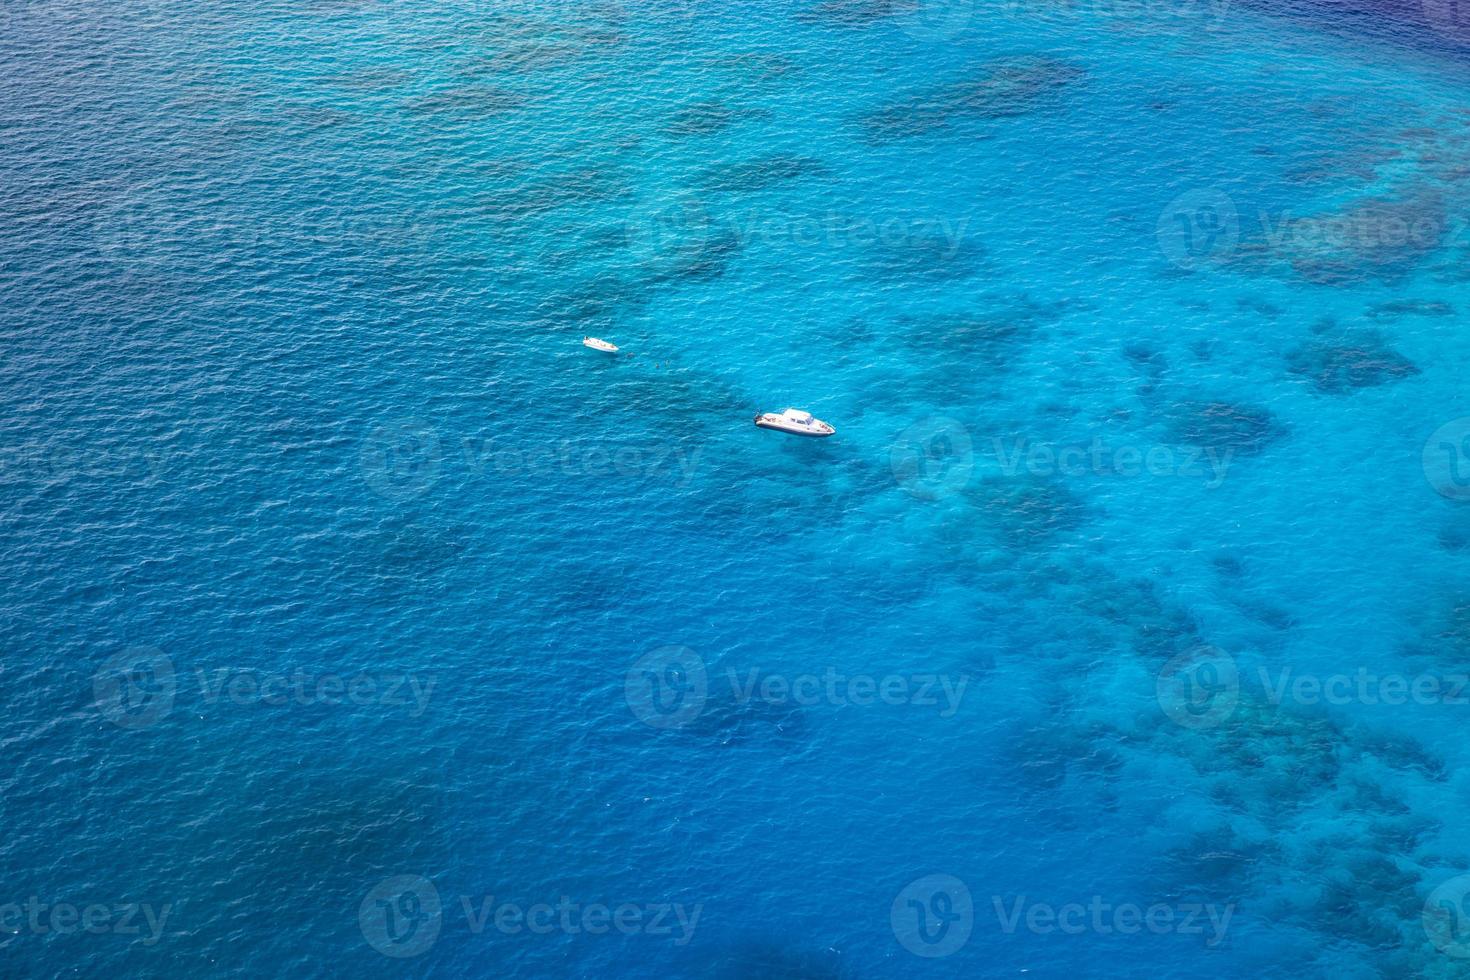 Aerial picture of turquoise blue tropical ocean lagoon, white sandy beach, sandbank coral reef shallow water with a boat. Nature perfection in Maldives sea. Luxury life experience, peaceful landscape photo